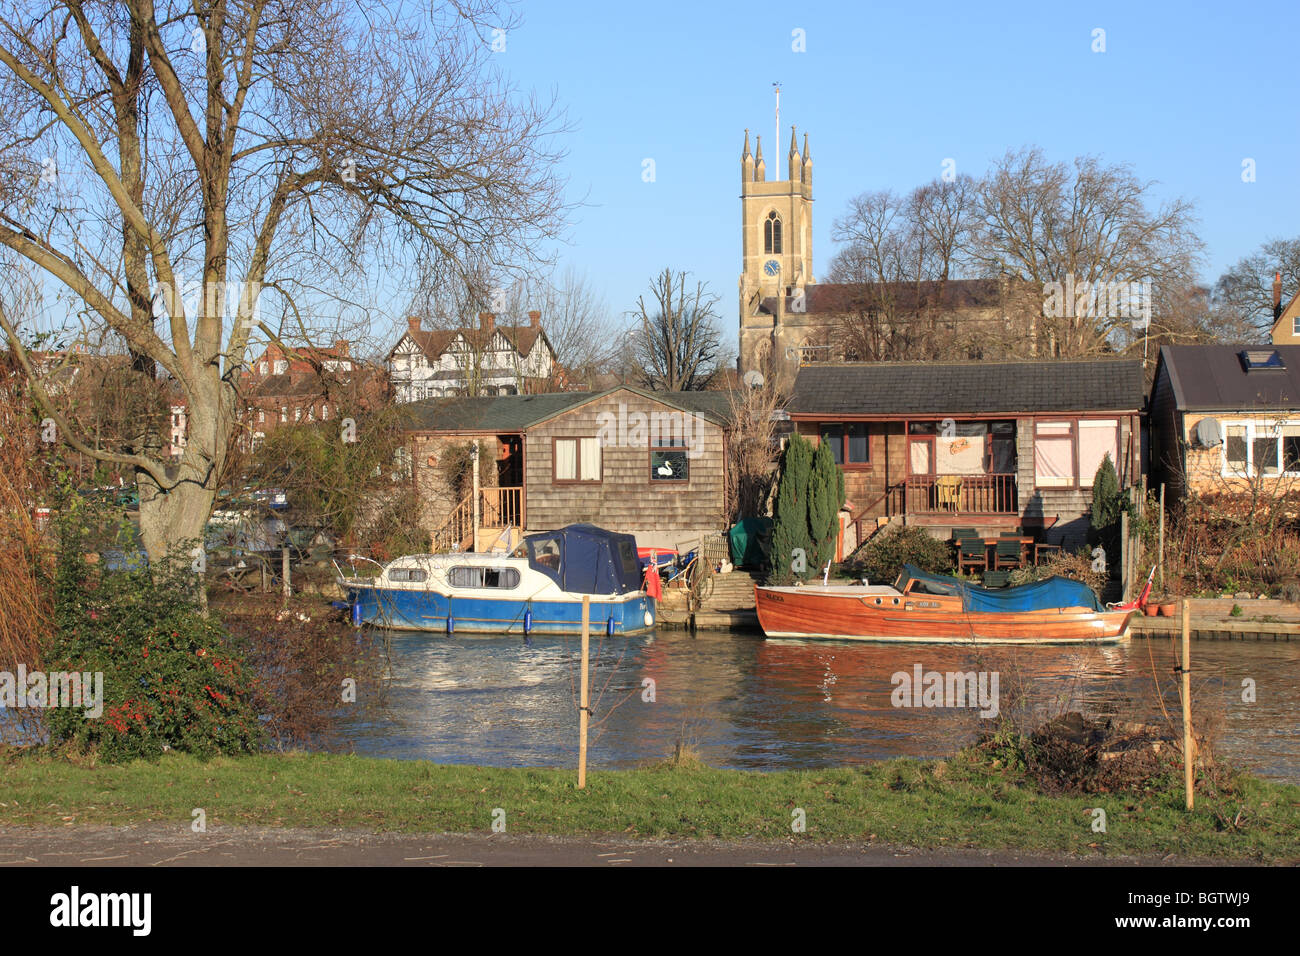 Boats and holiday homes on Garrick's Ait island, River Thames, East Molesey, England, UK, Europe. Hampton church on other side of river in background. Stock Photo